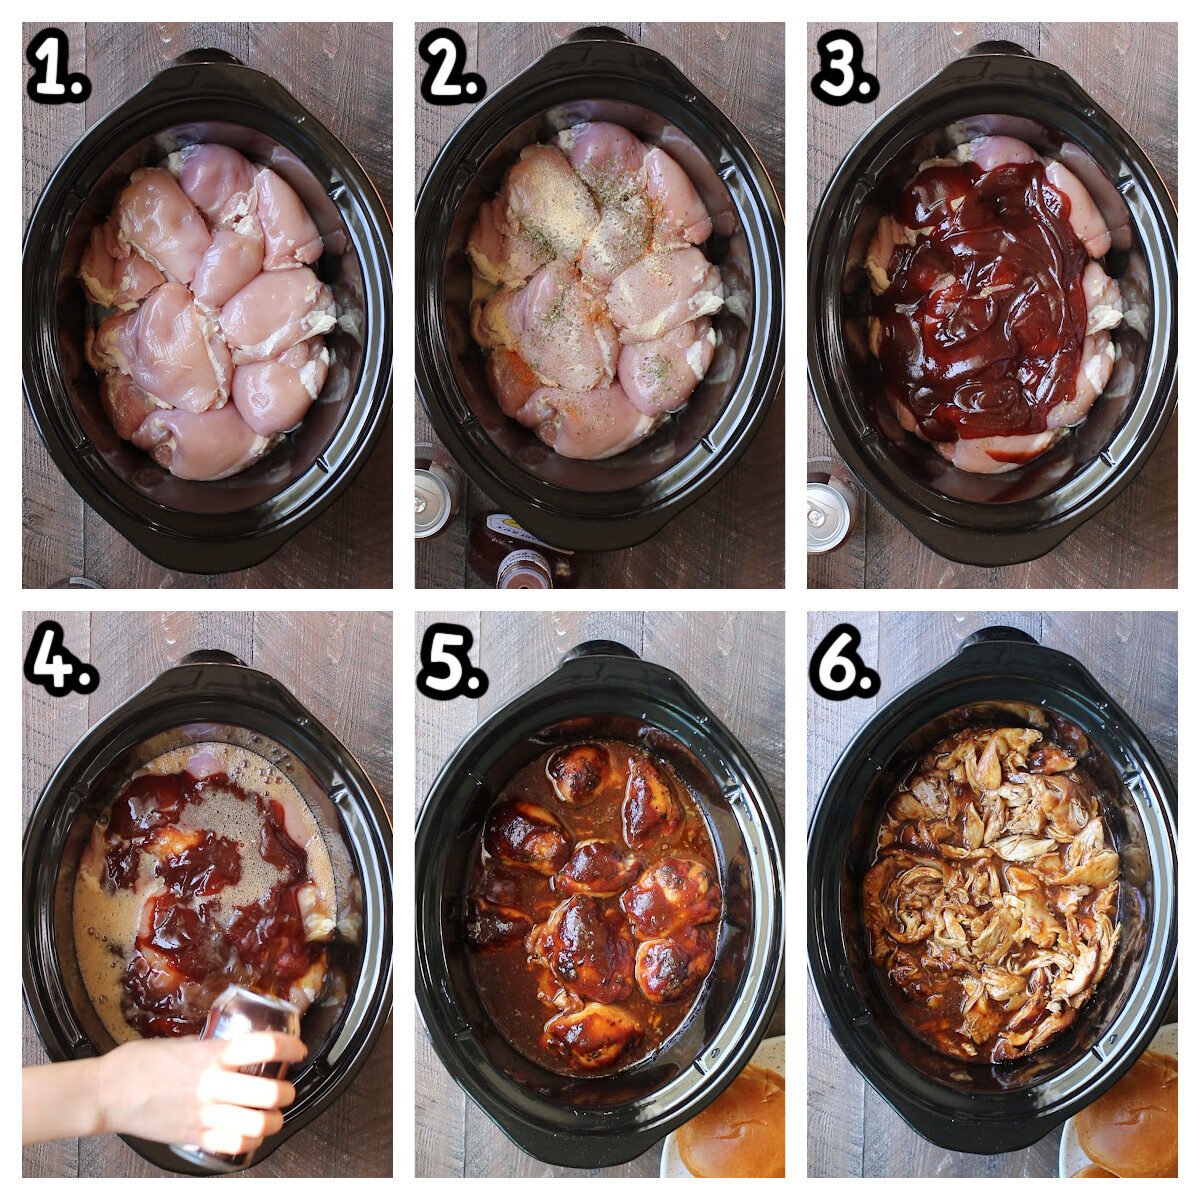 6 images of how to make root beer chicken in a crockpot.